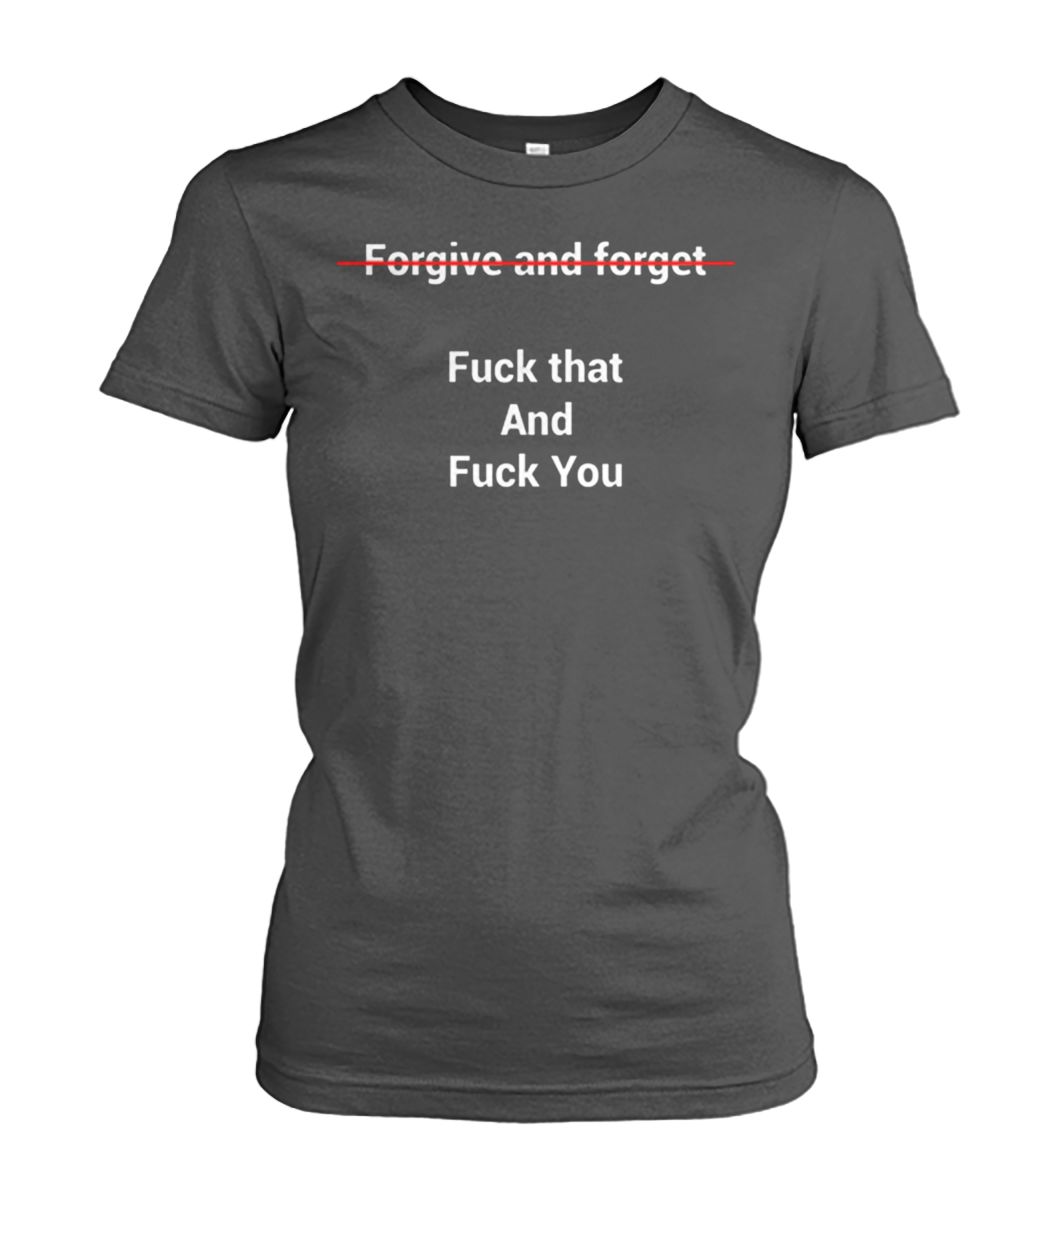 Forgive and forget fuck that and fuck you women's crew tee